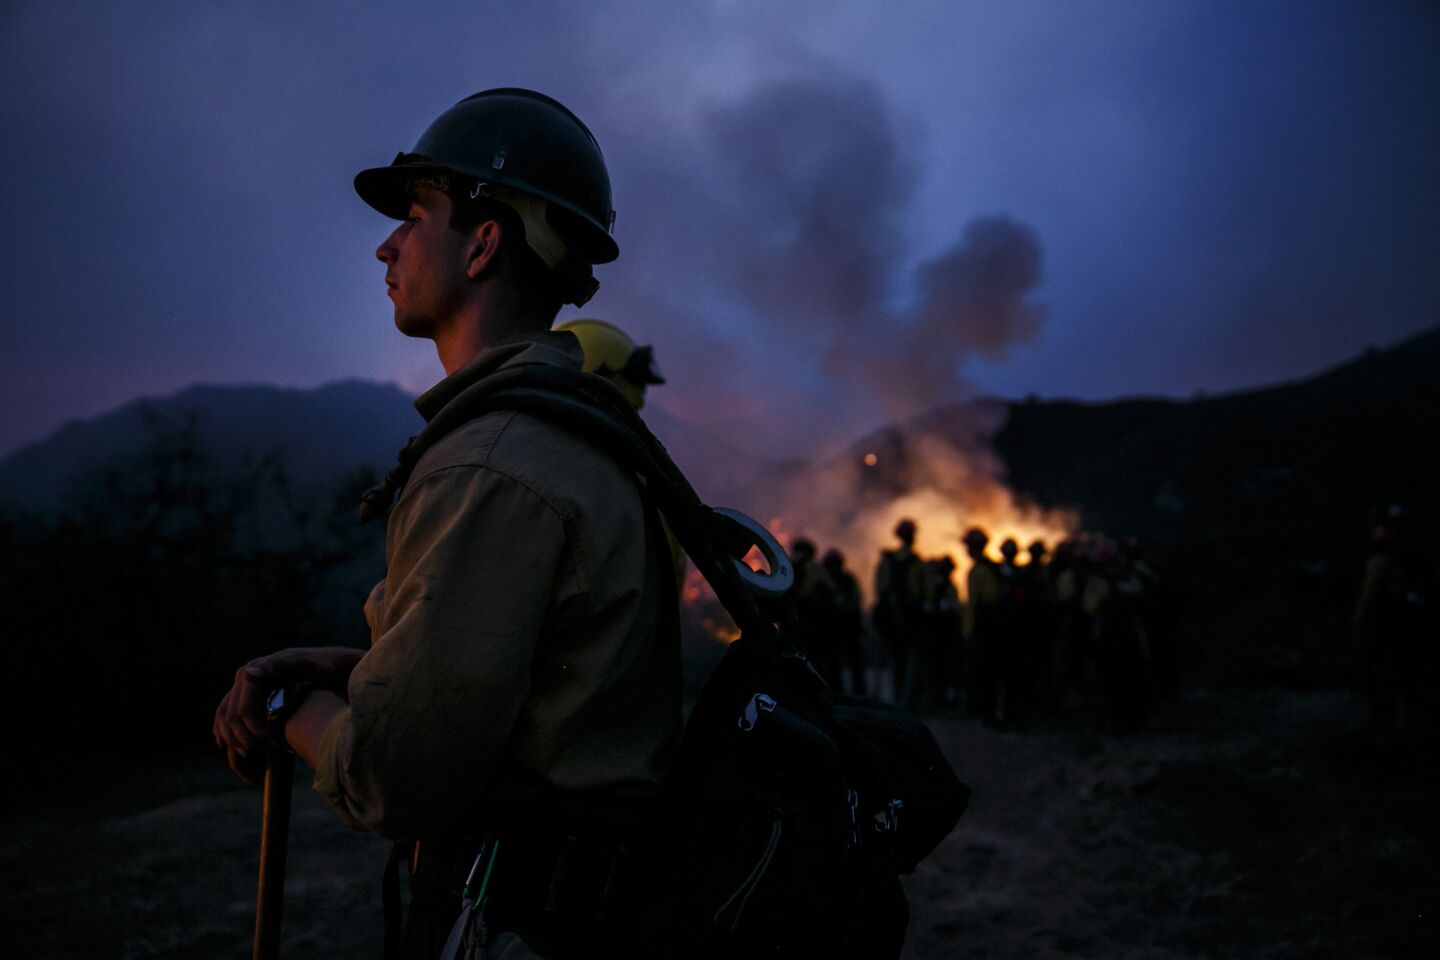 Firefighters monitor the embers in the air as they conduct a burn-out operation in El Capitan Canyon.